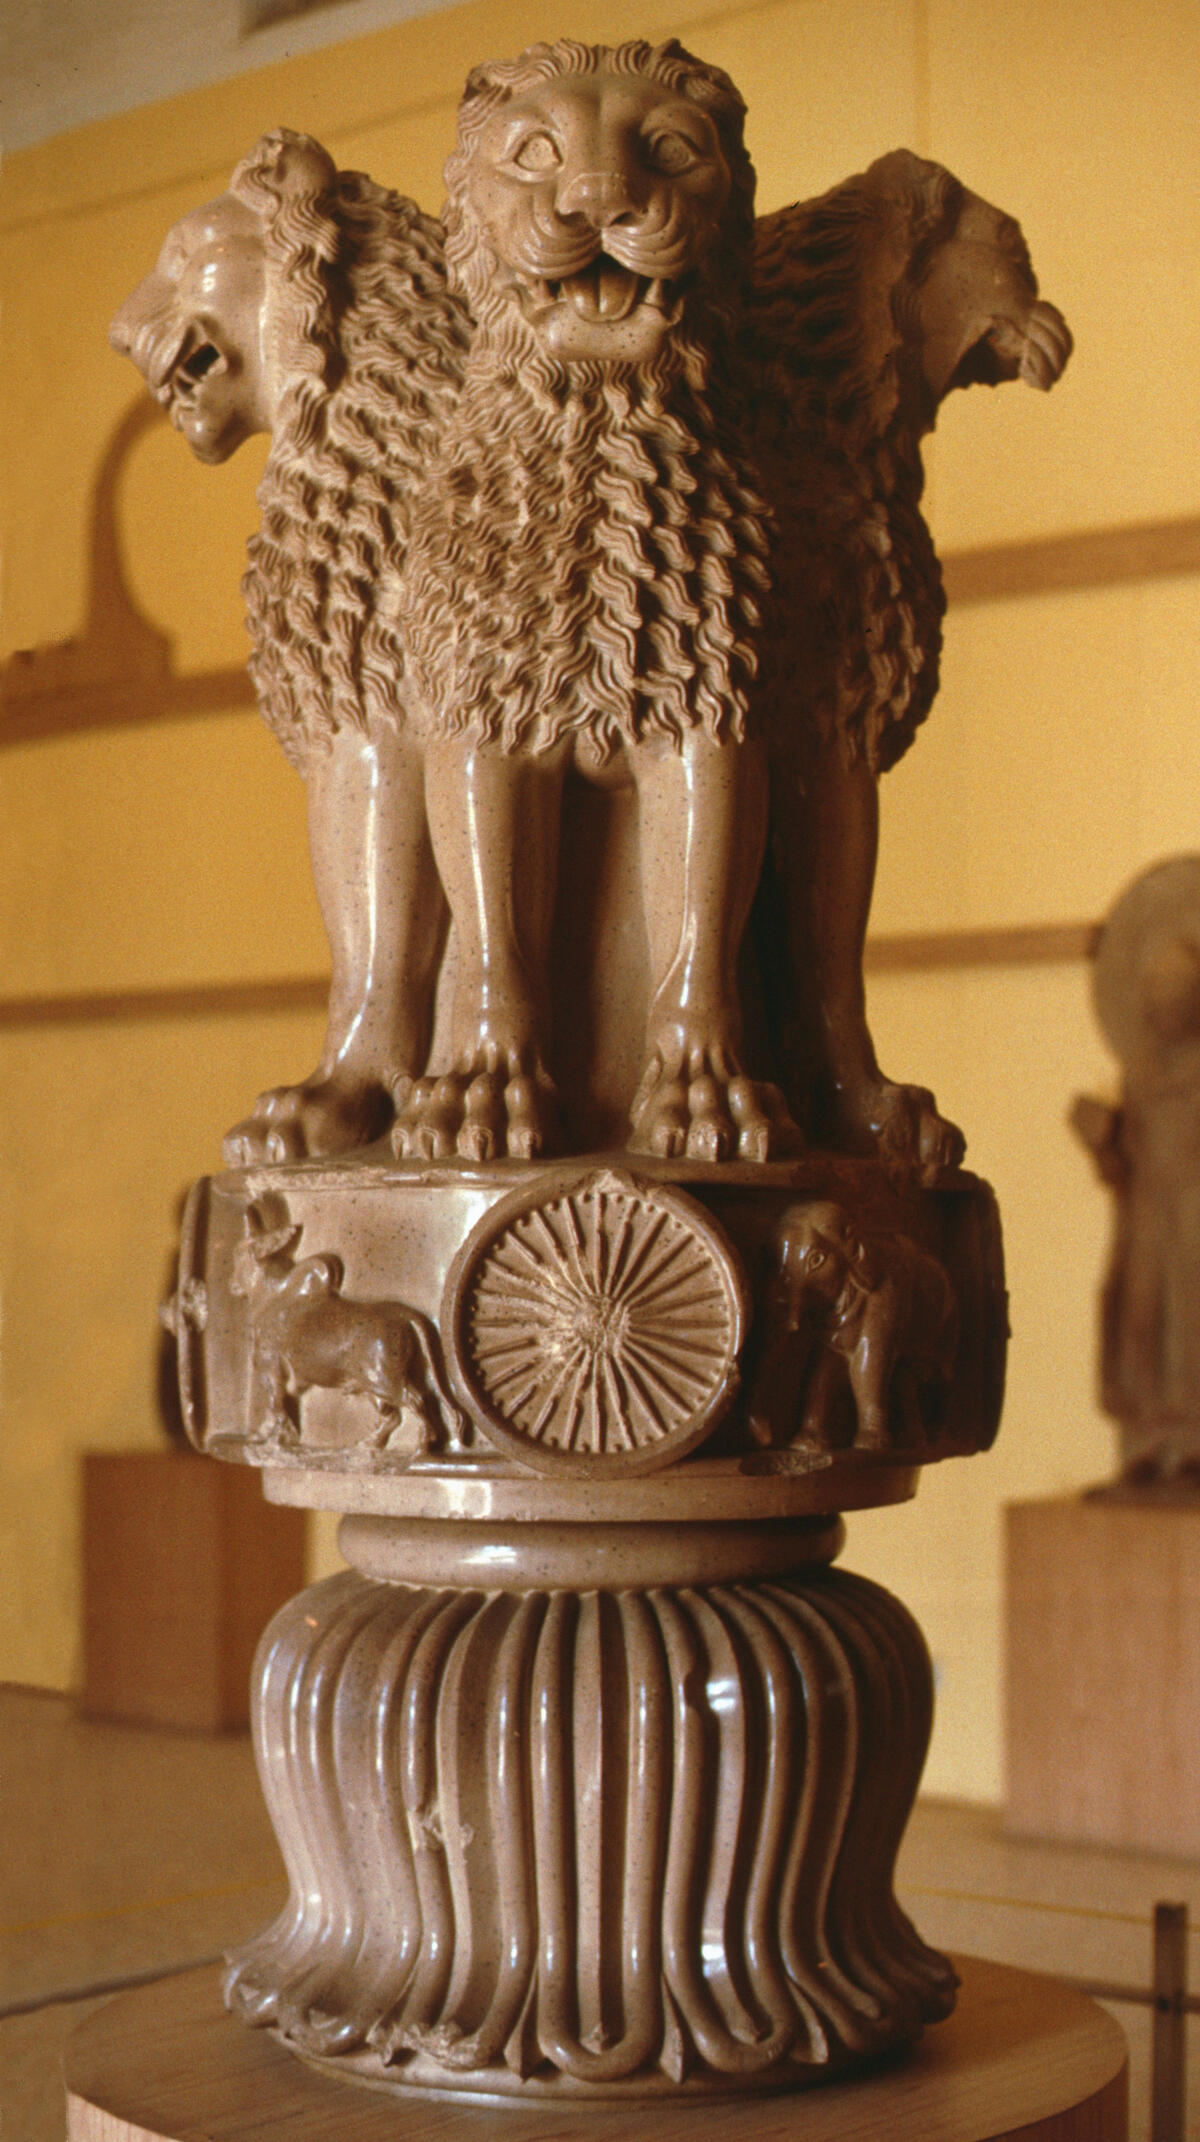 sculpture with lions, dharmachakra and lotus